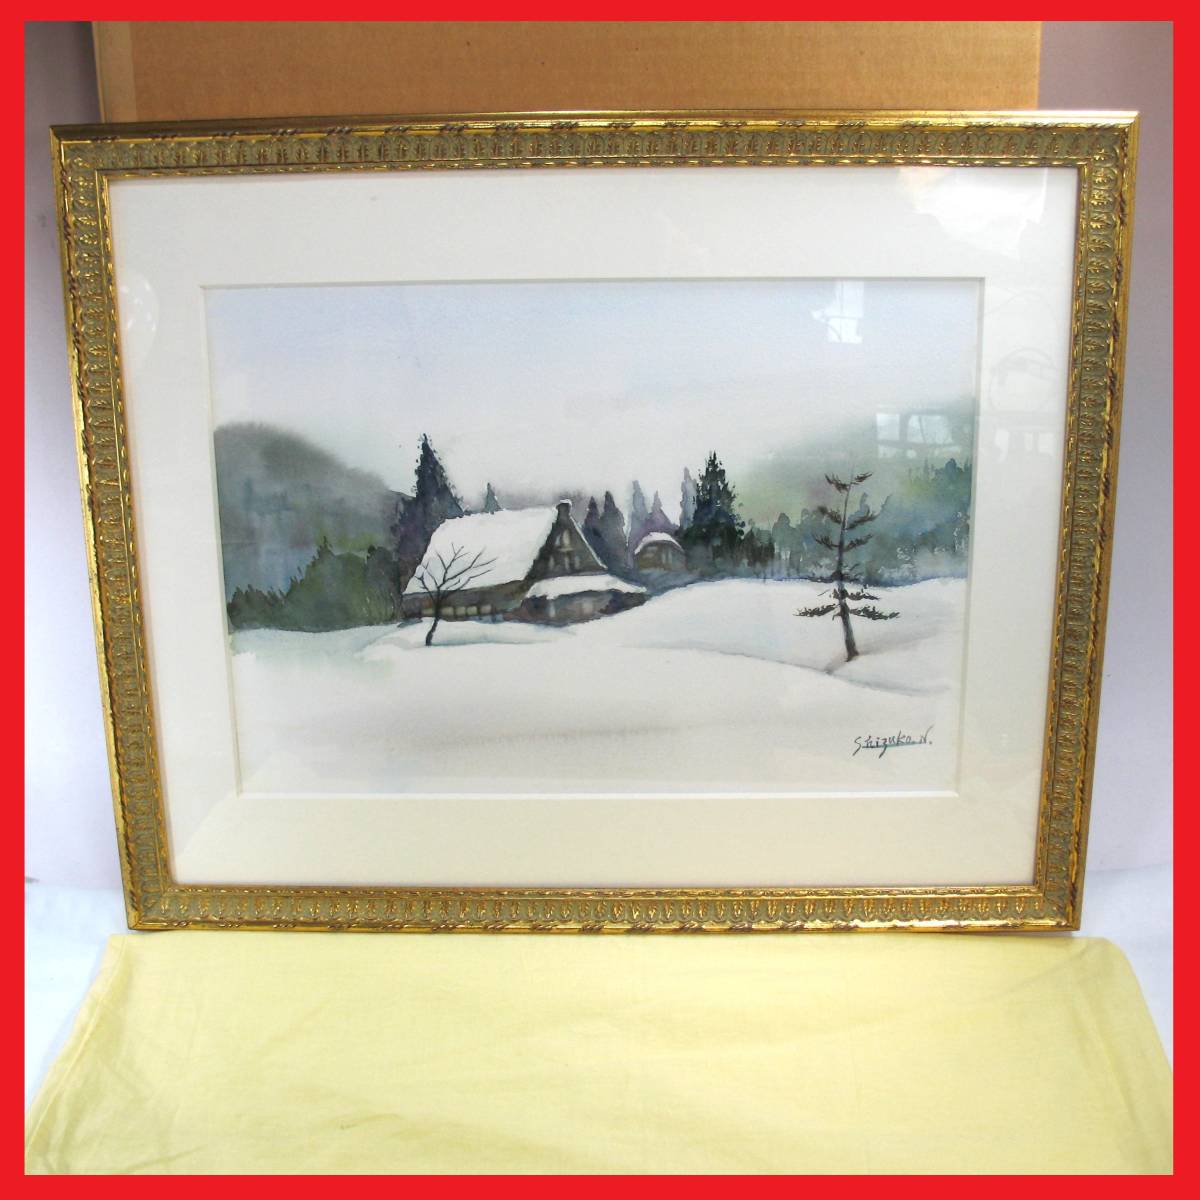 Free shipping! Pastel painting by Shizuko Naoe Hand-drawn painting Snow scene, Thatched house, Rural house, Japanese winter scene, Golden frame, Nostalgic scenery, Authentic painting (red frame), artwork, painting, pastel painting, crayon drawing